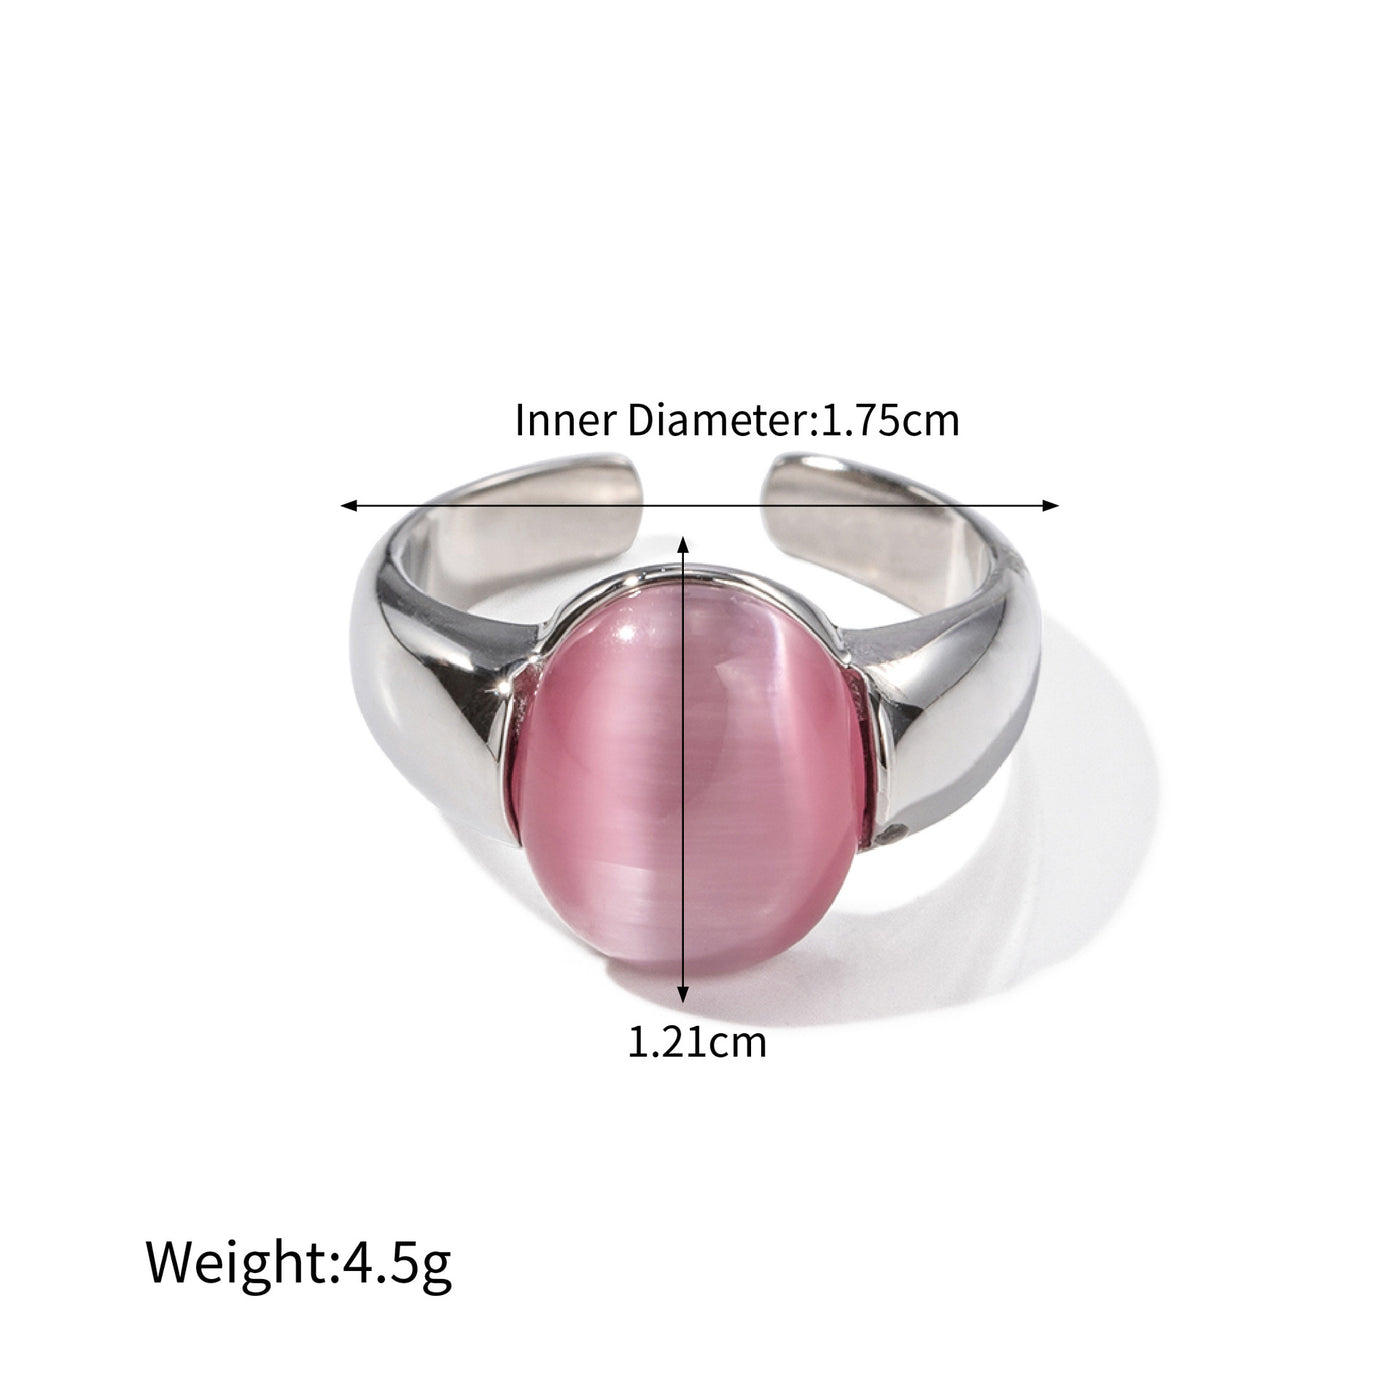 18K gold noble oval inlaid pink cat's eye design ring - Syble's